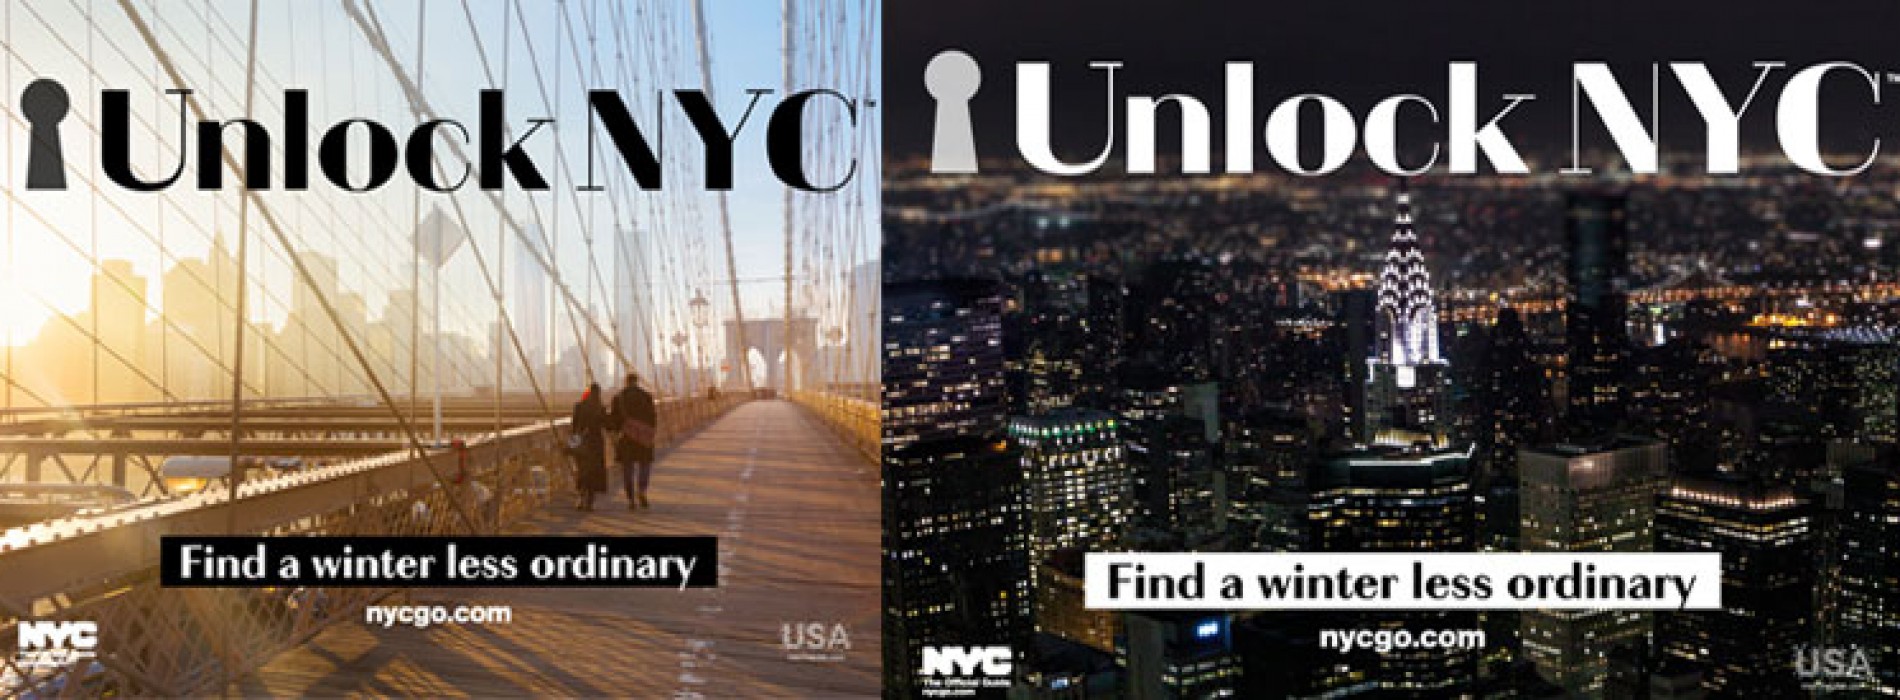 NYC & Company Unveils New “Unlock NYC” Campaign to Inspire and Stimulate Winter Travel to New York City